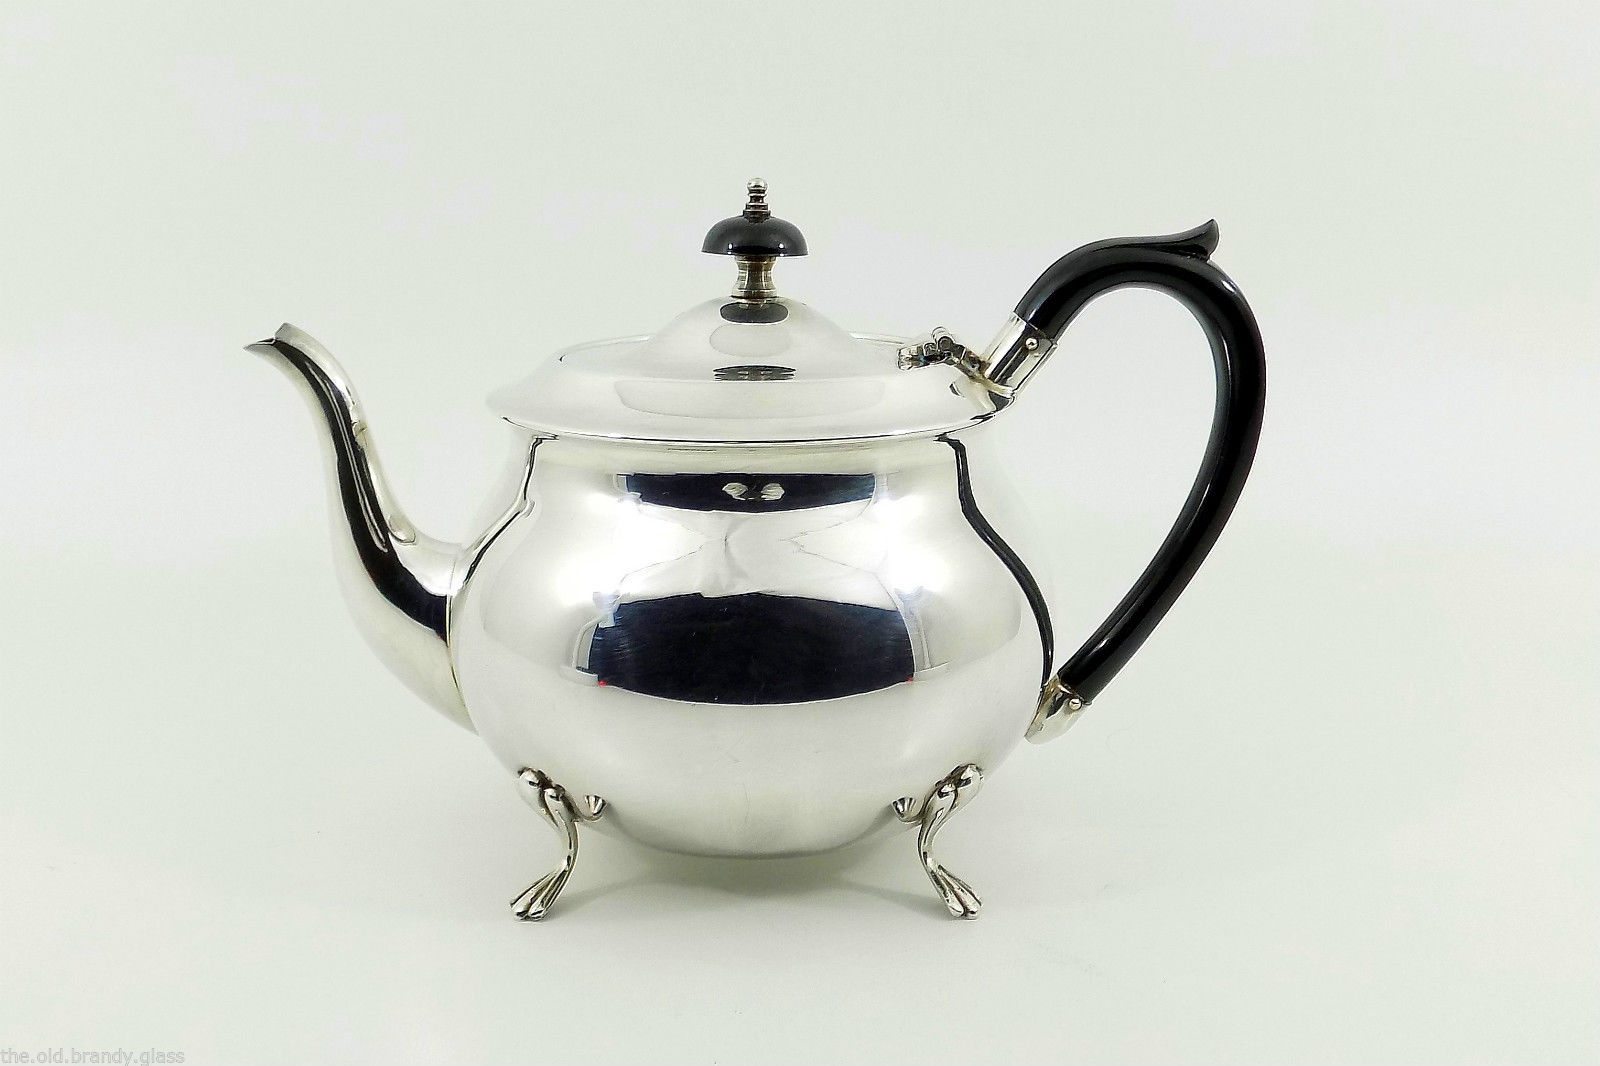 Antique English Silver Plated Teapot (Yeoman of England c1920)